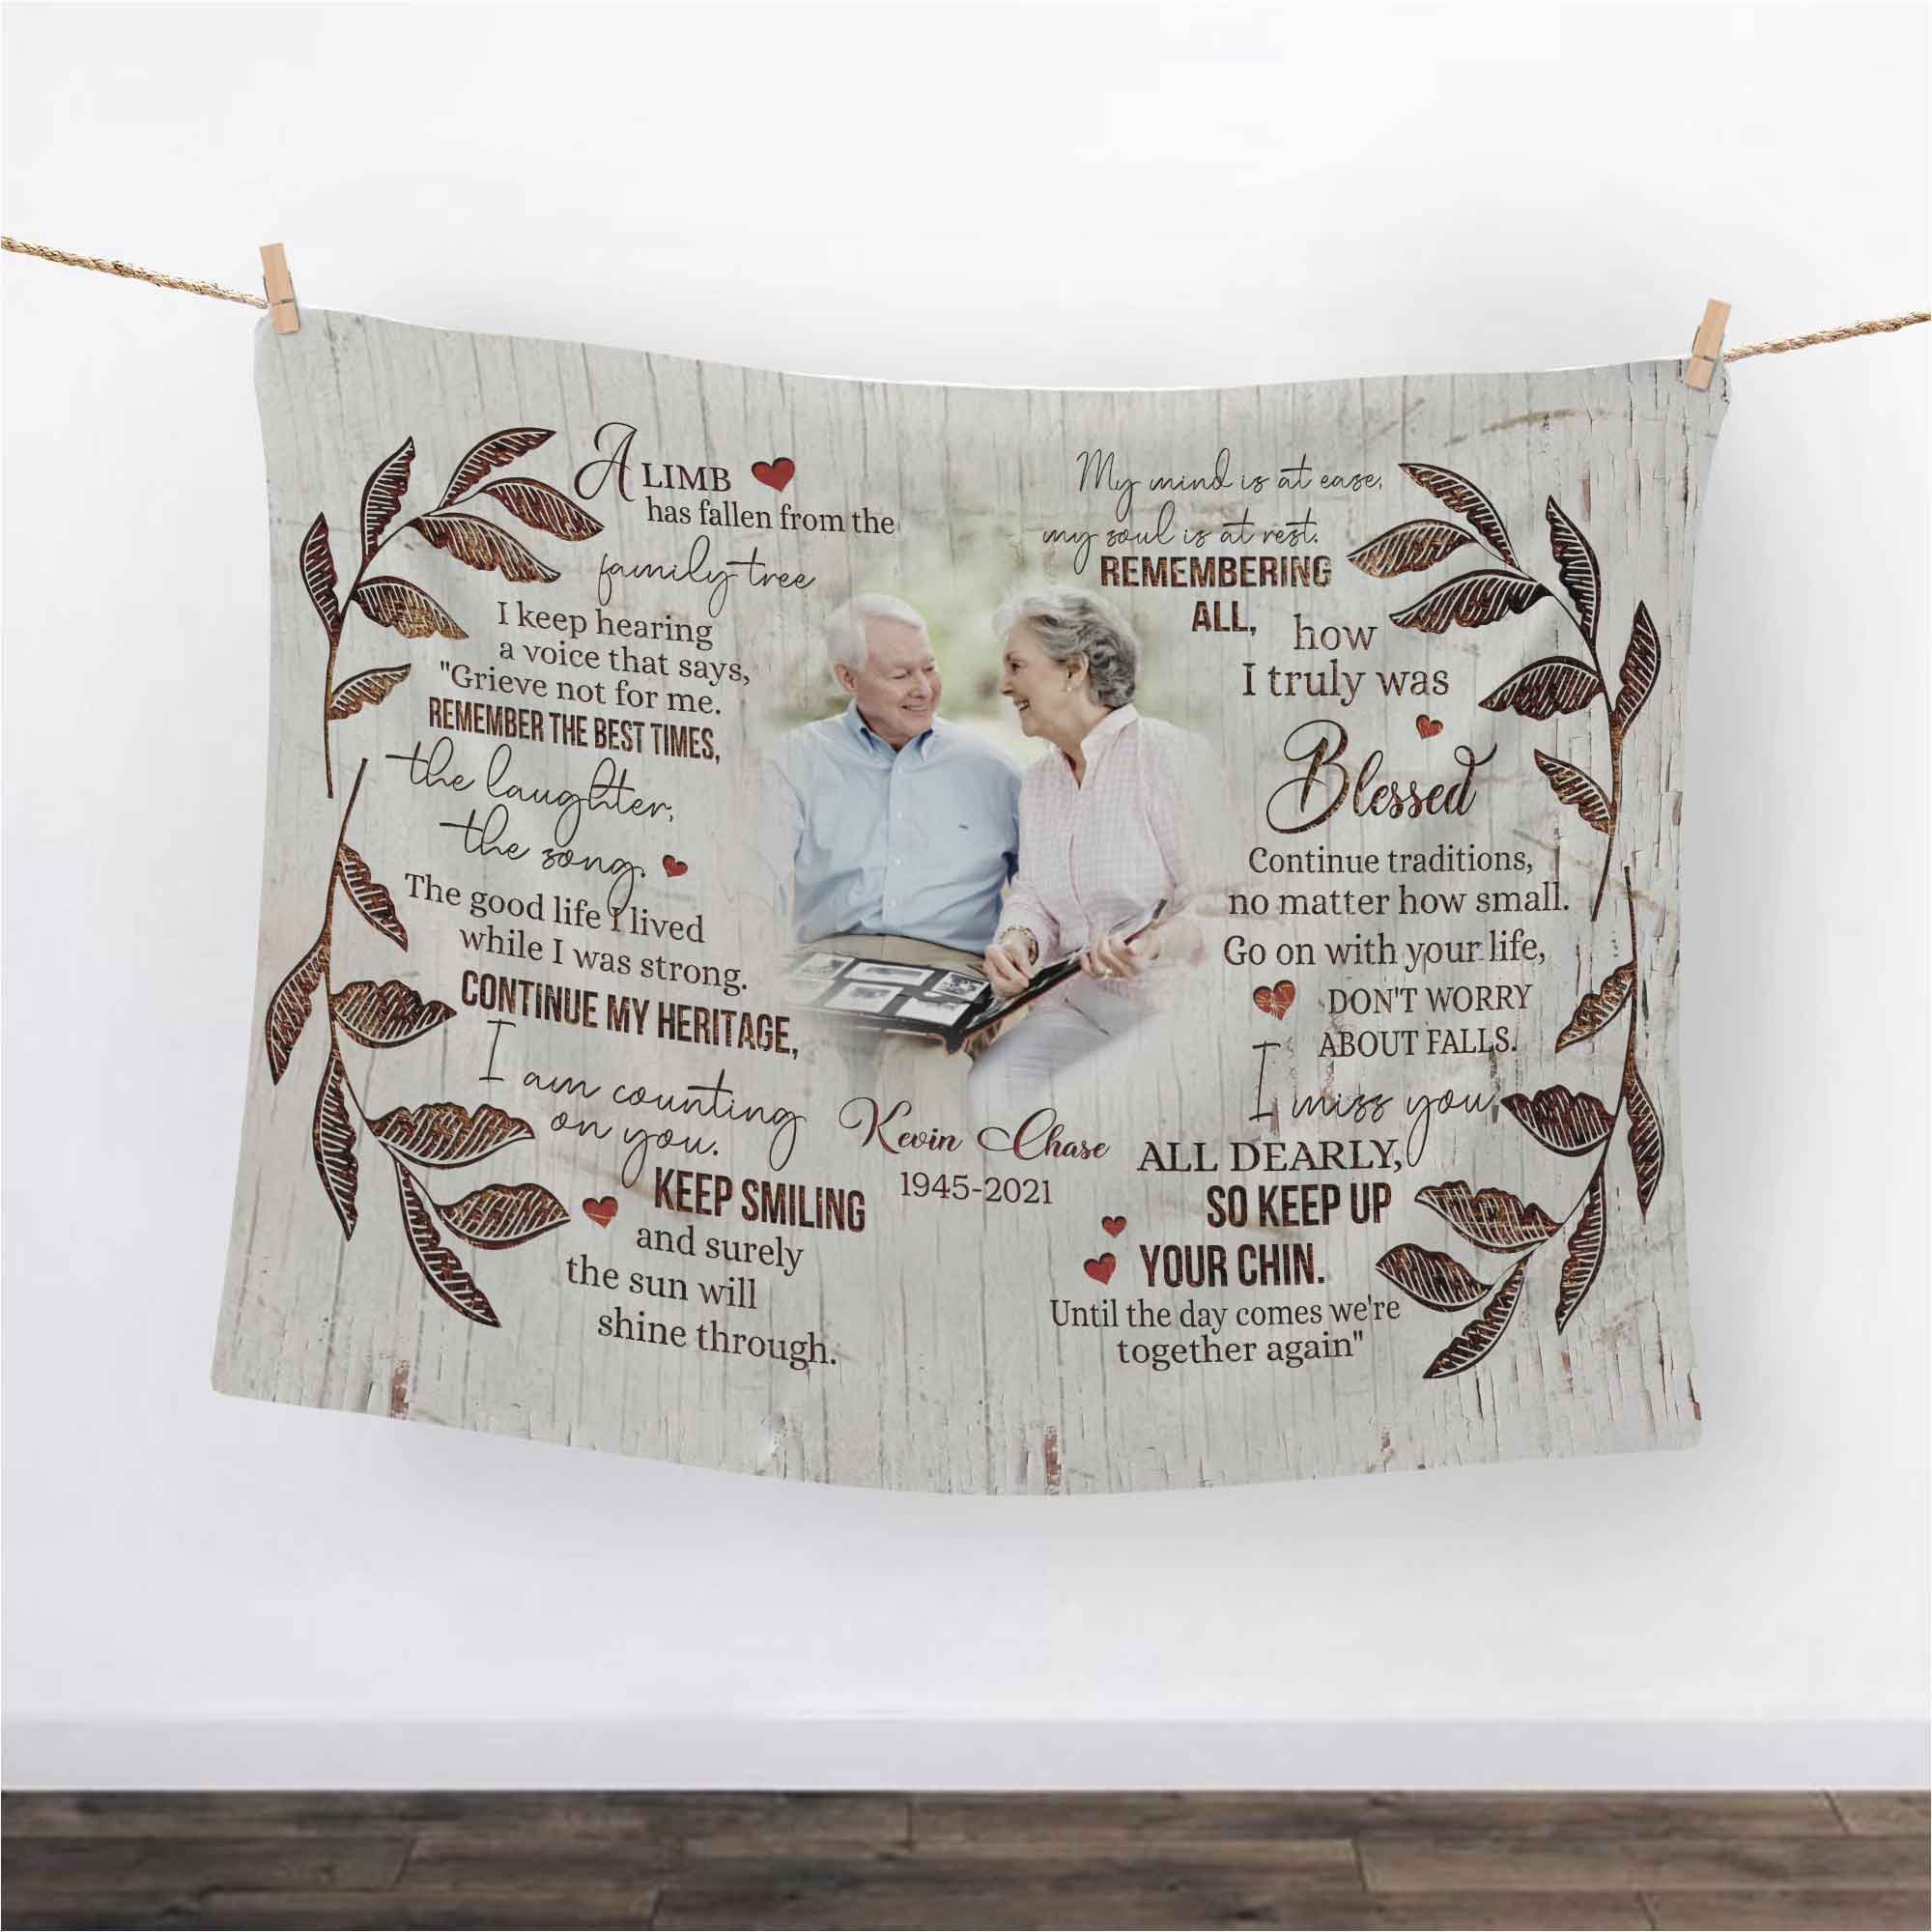 Personalized A Limb Has Fallen Memorial Blankets For Loss Of Mother/Father, In Loving Memory Gift